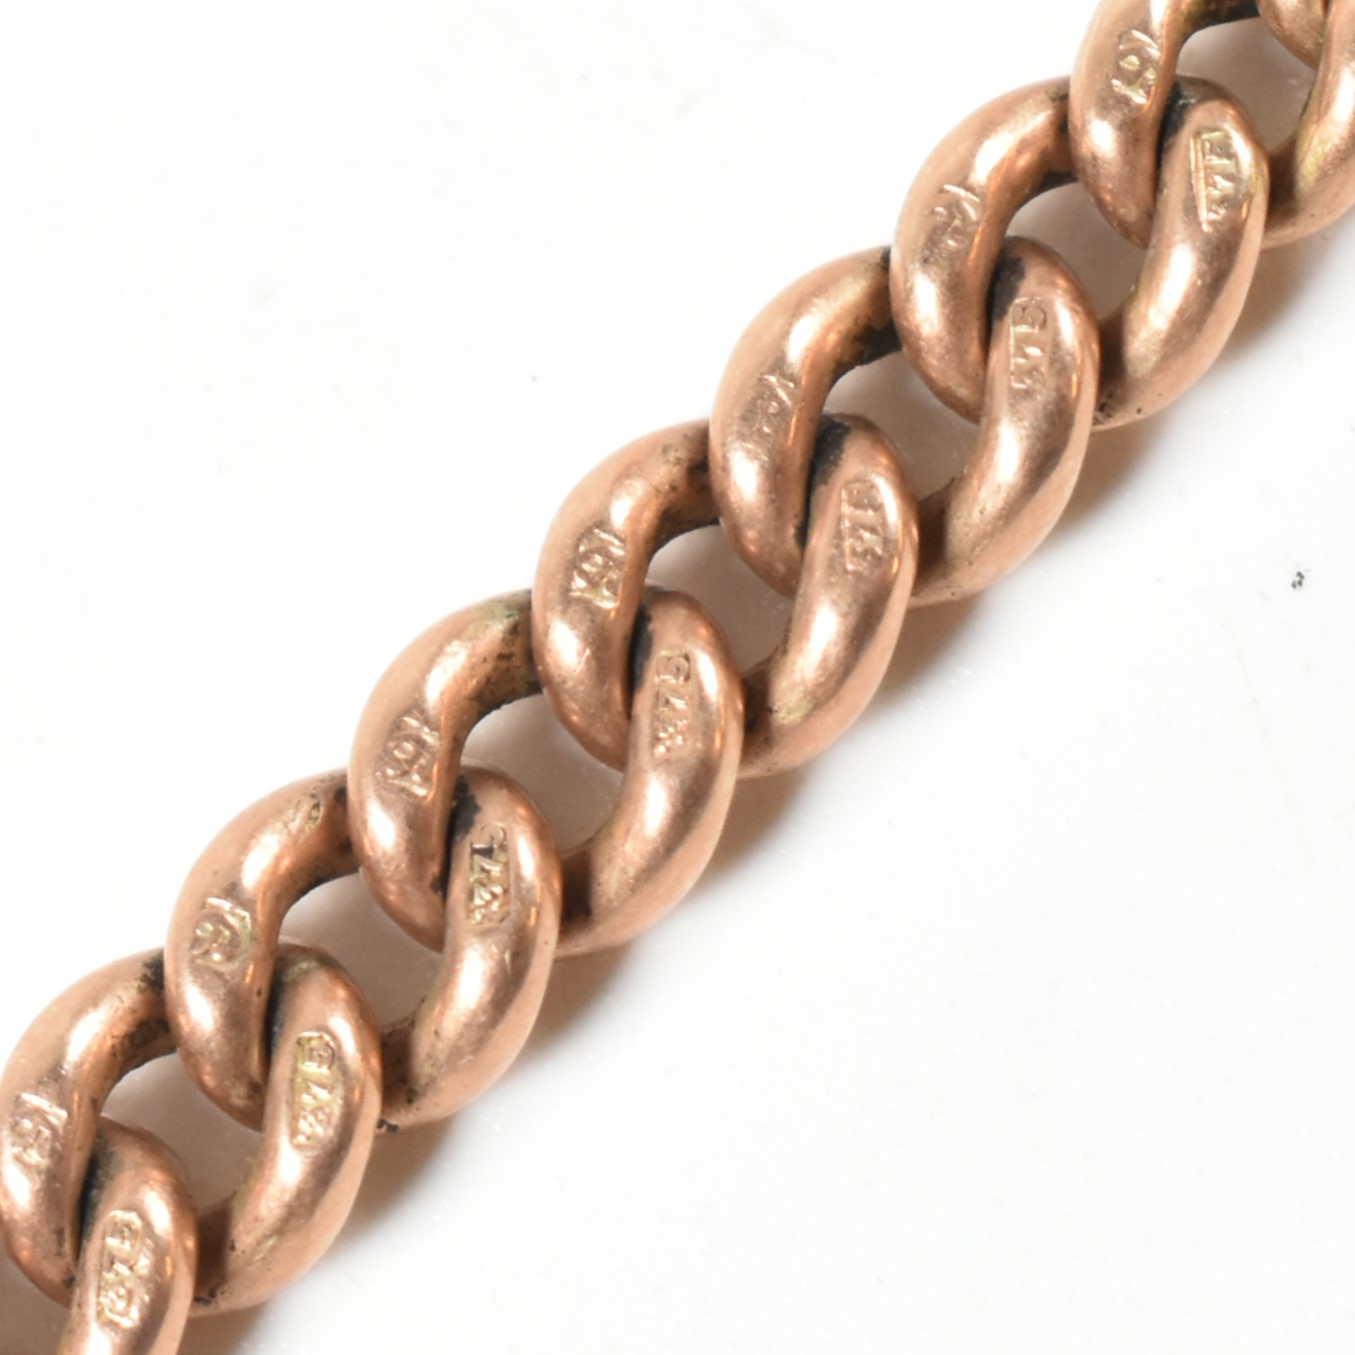 GEORGE V HALLMARKED 9CT ROSE GOLD WATCH CHAIN - Image 4 of 5